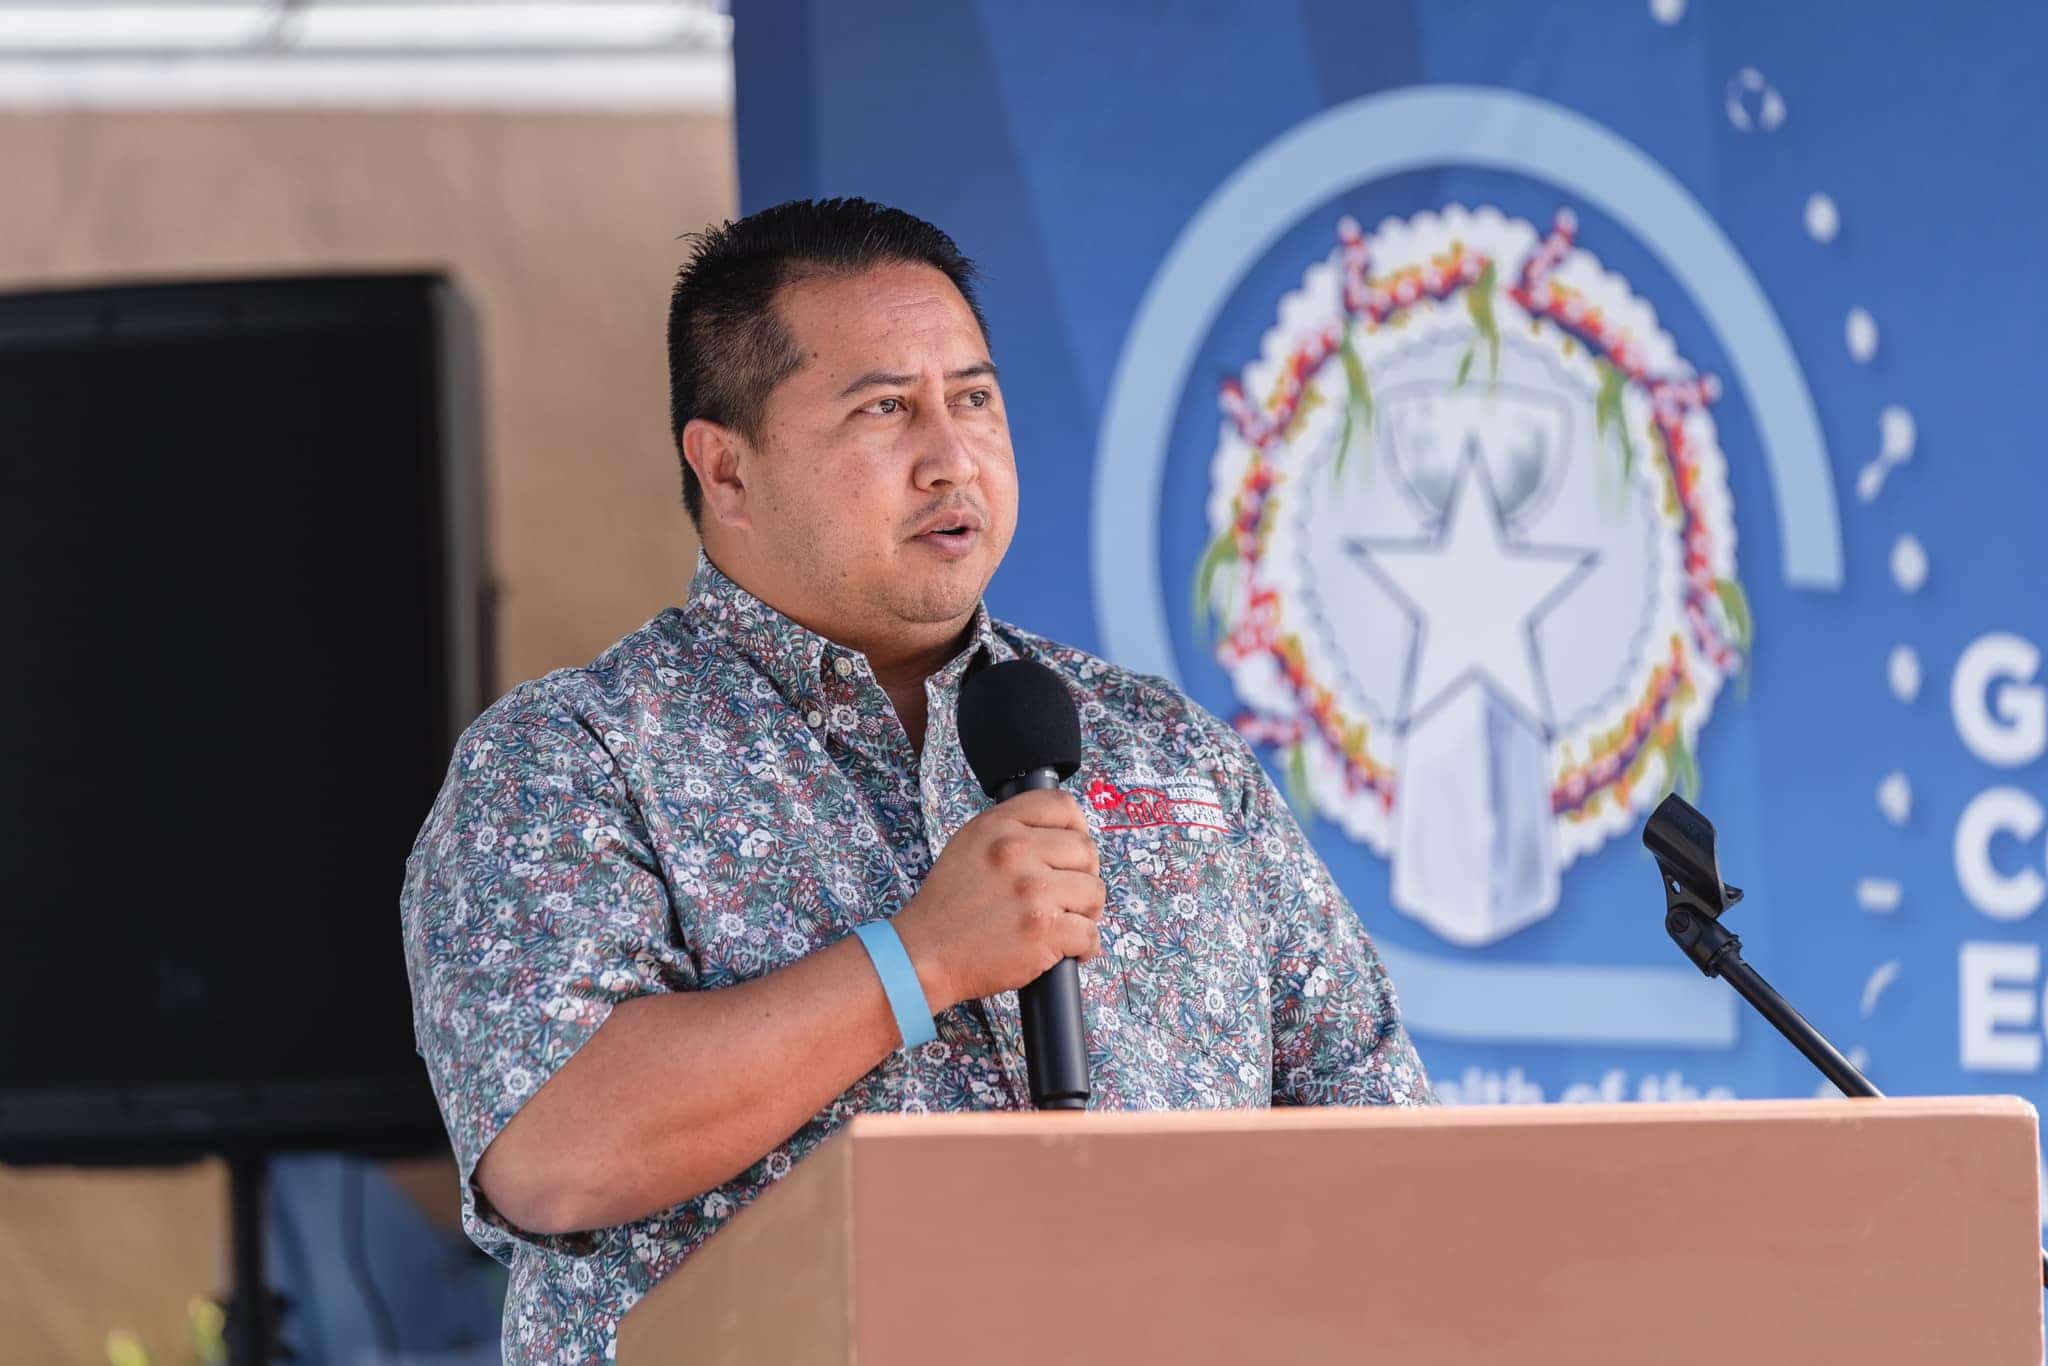 Northern Mariana Islands Governor political future further imperiled by criminal charges